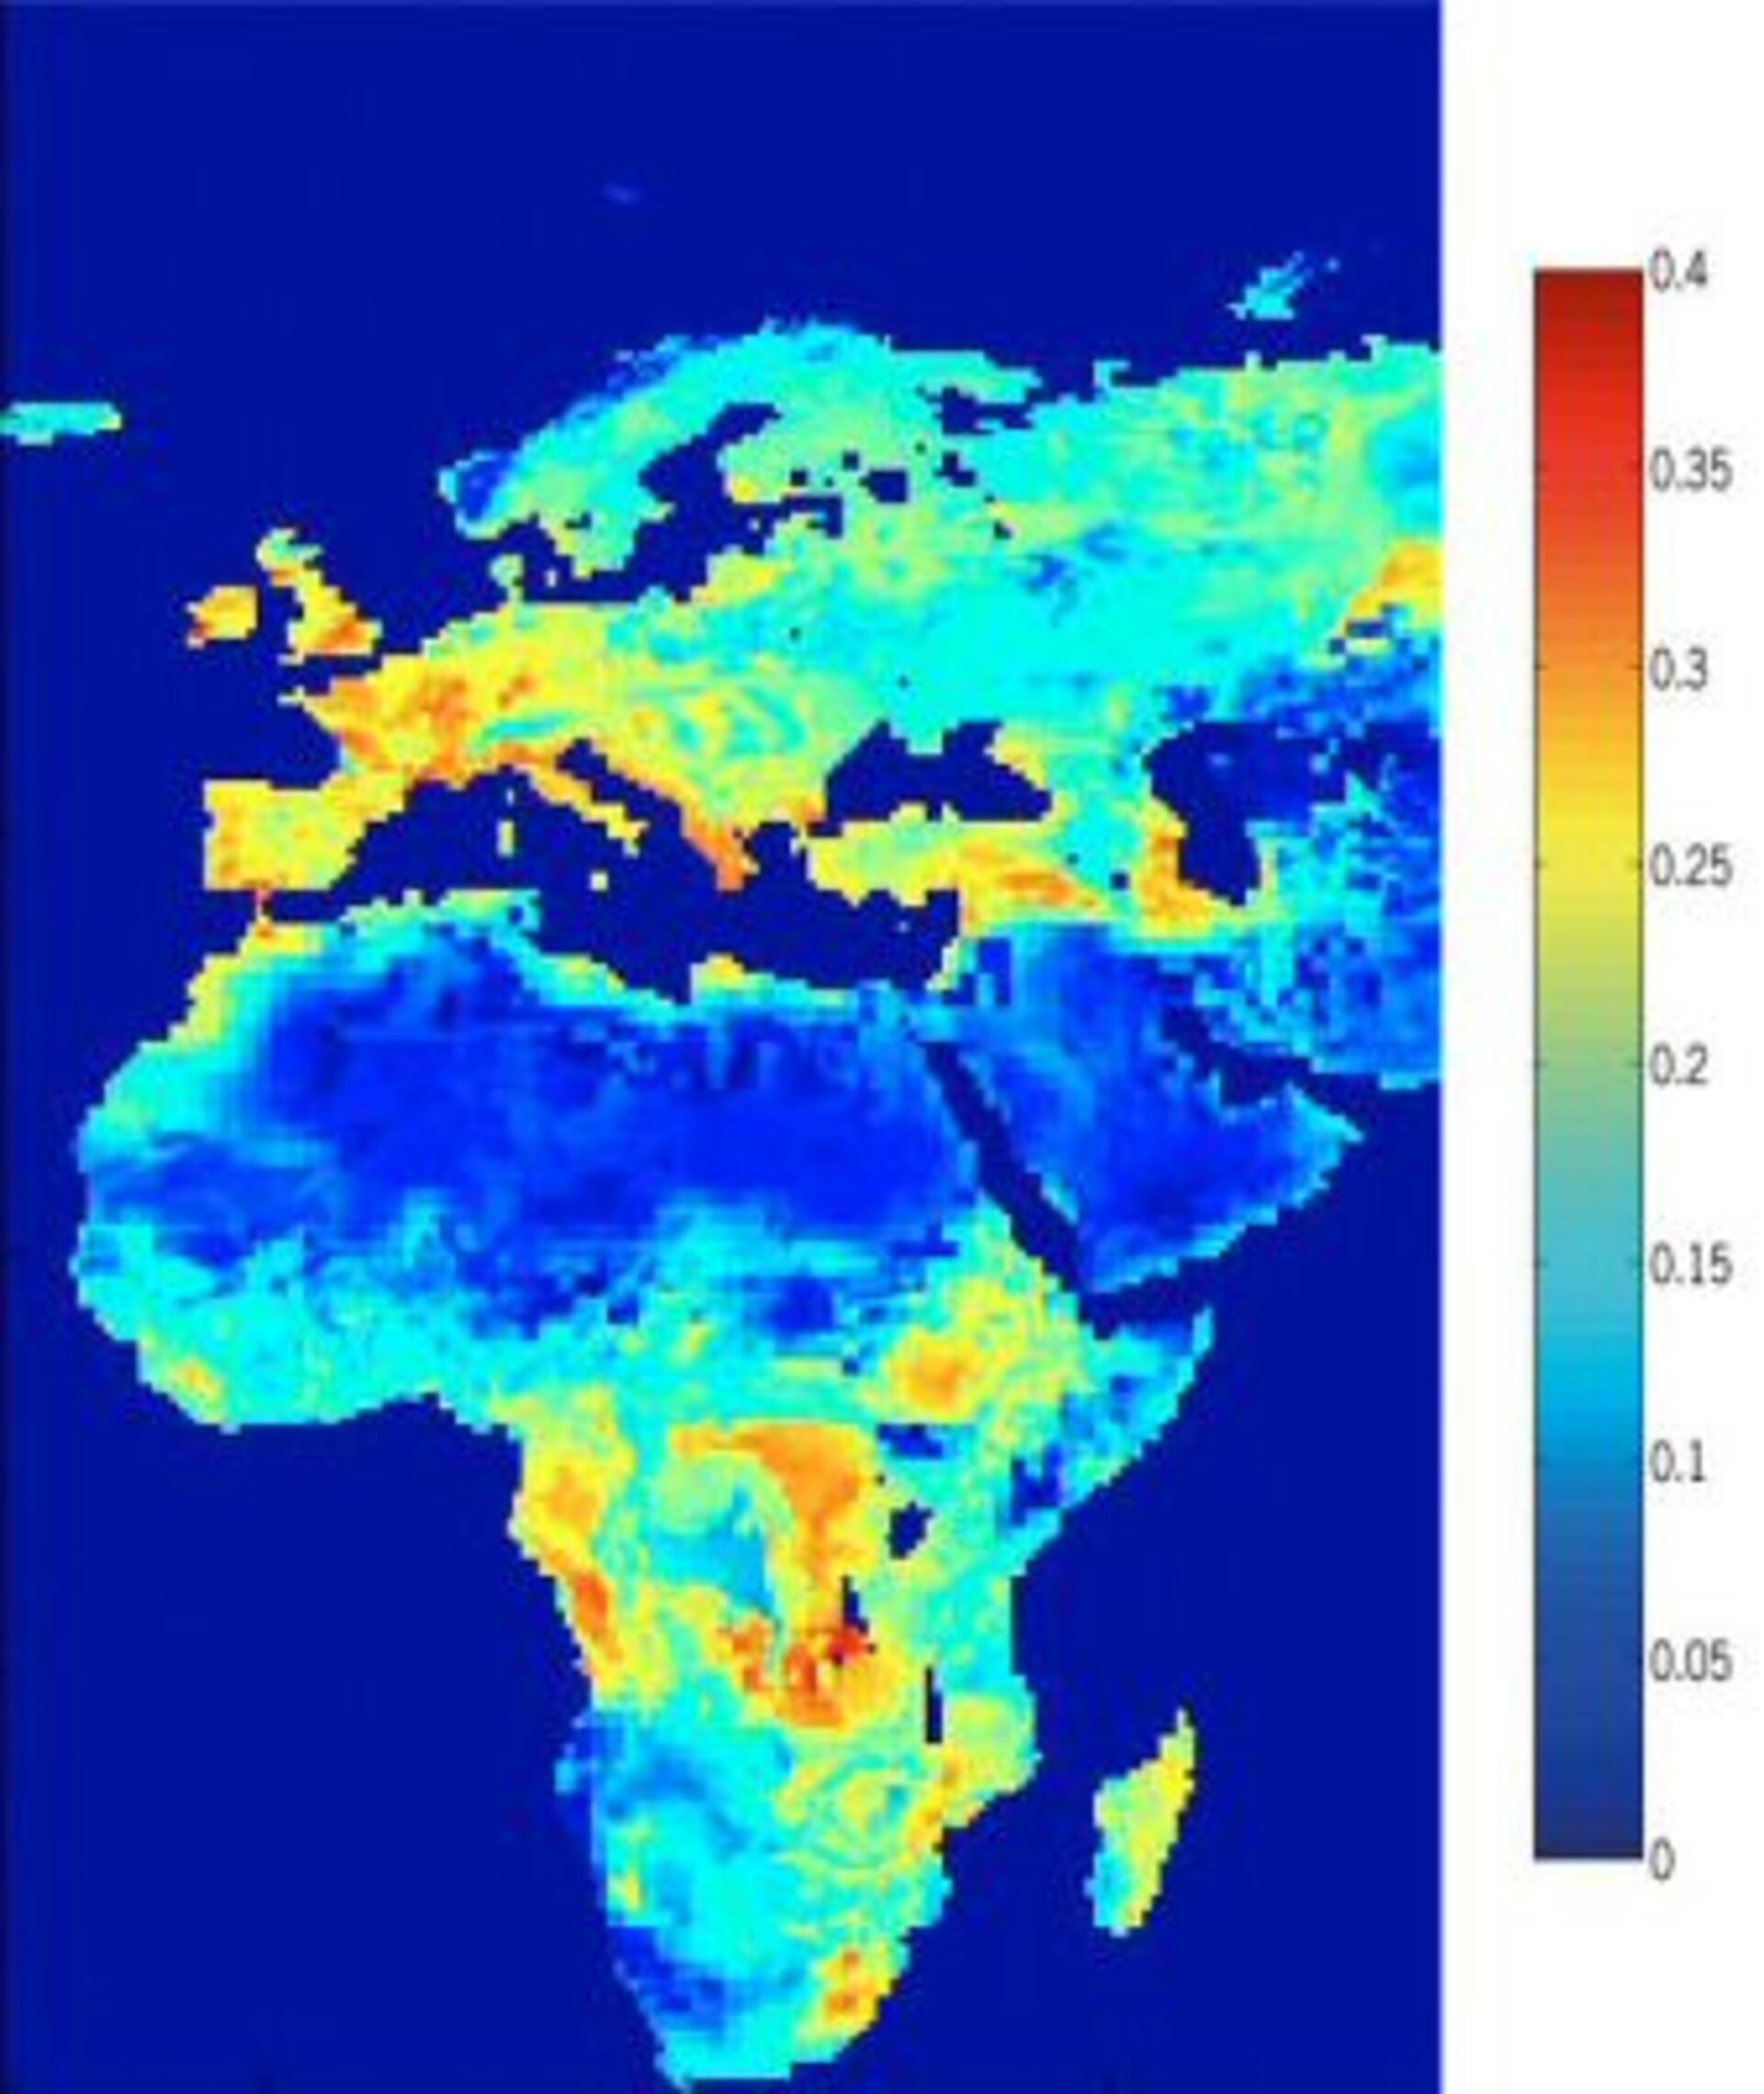 Simulated seasonal (winter) soil mositure map of Europe and Africa